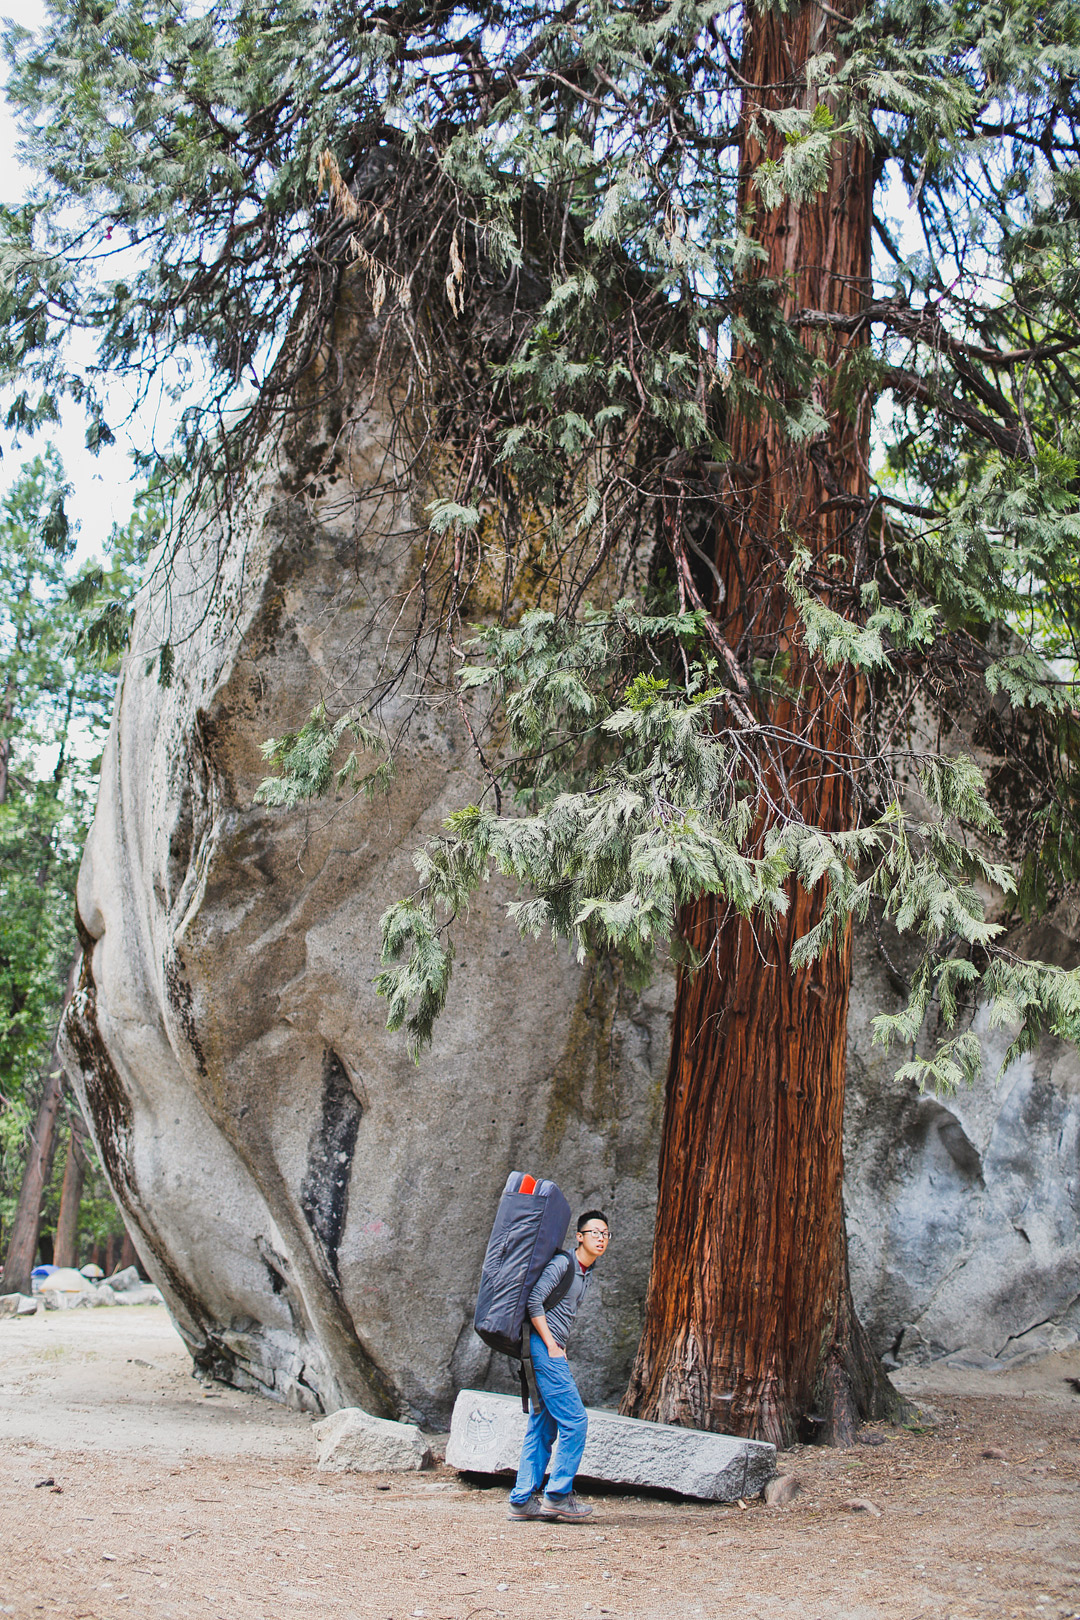 Climbing at Camp 4 + 17 Breathtaking Things to Do in Yosemite National Park // Eearth Travel #visittheusa #visitcalifornia #rockclimbing #yosemite #california